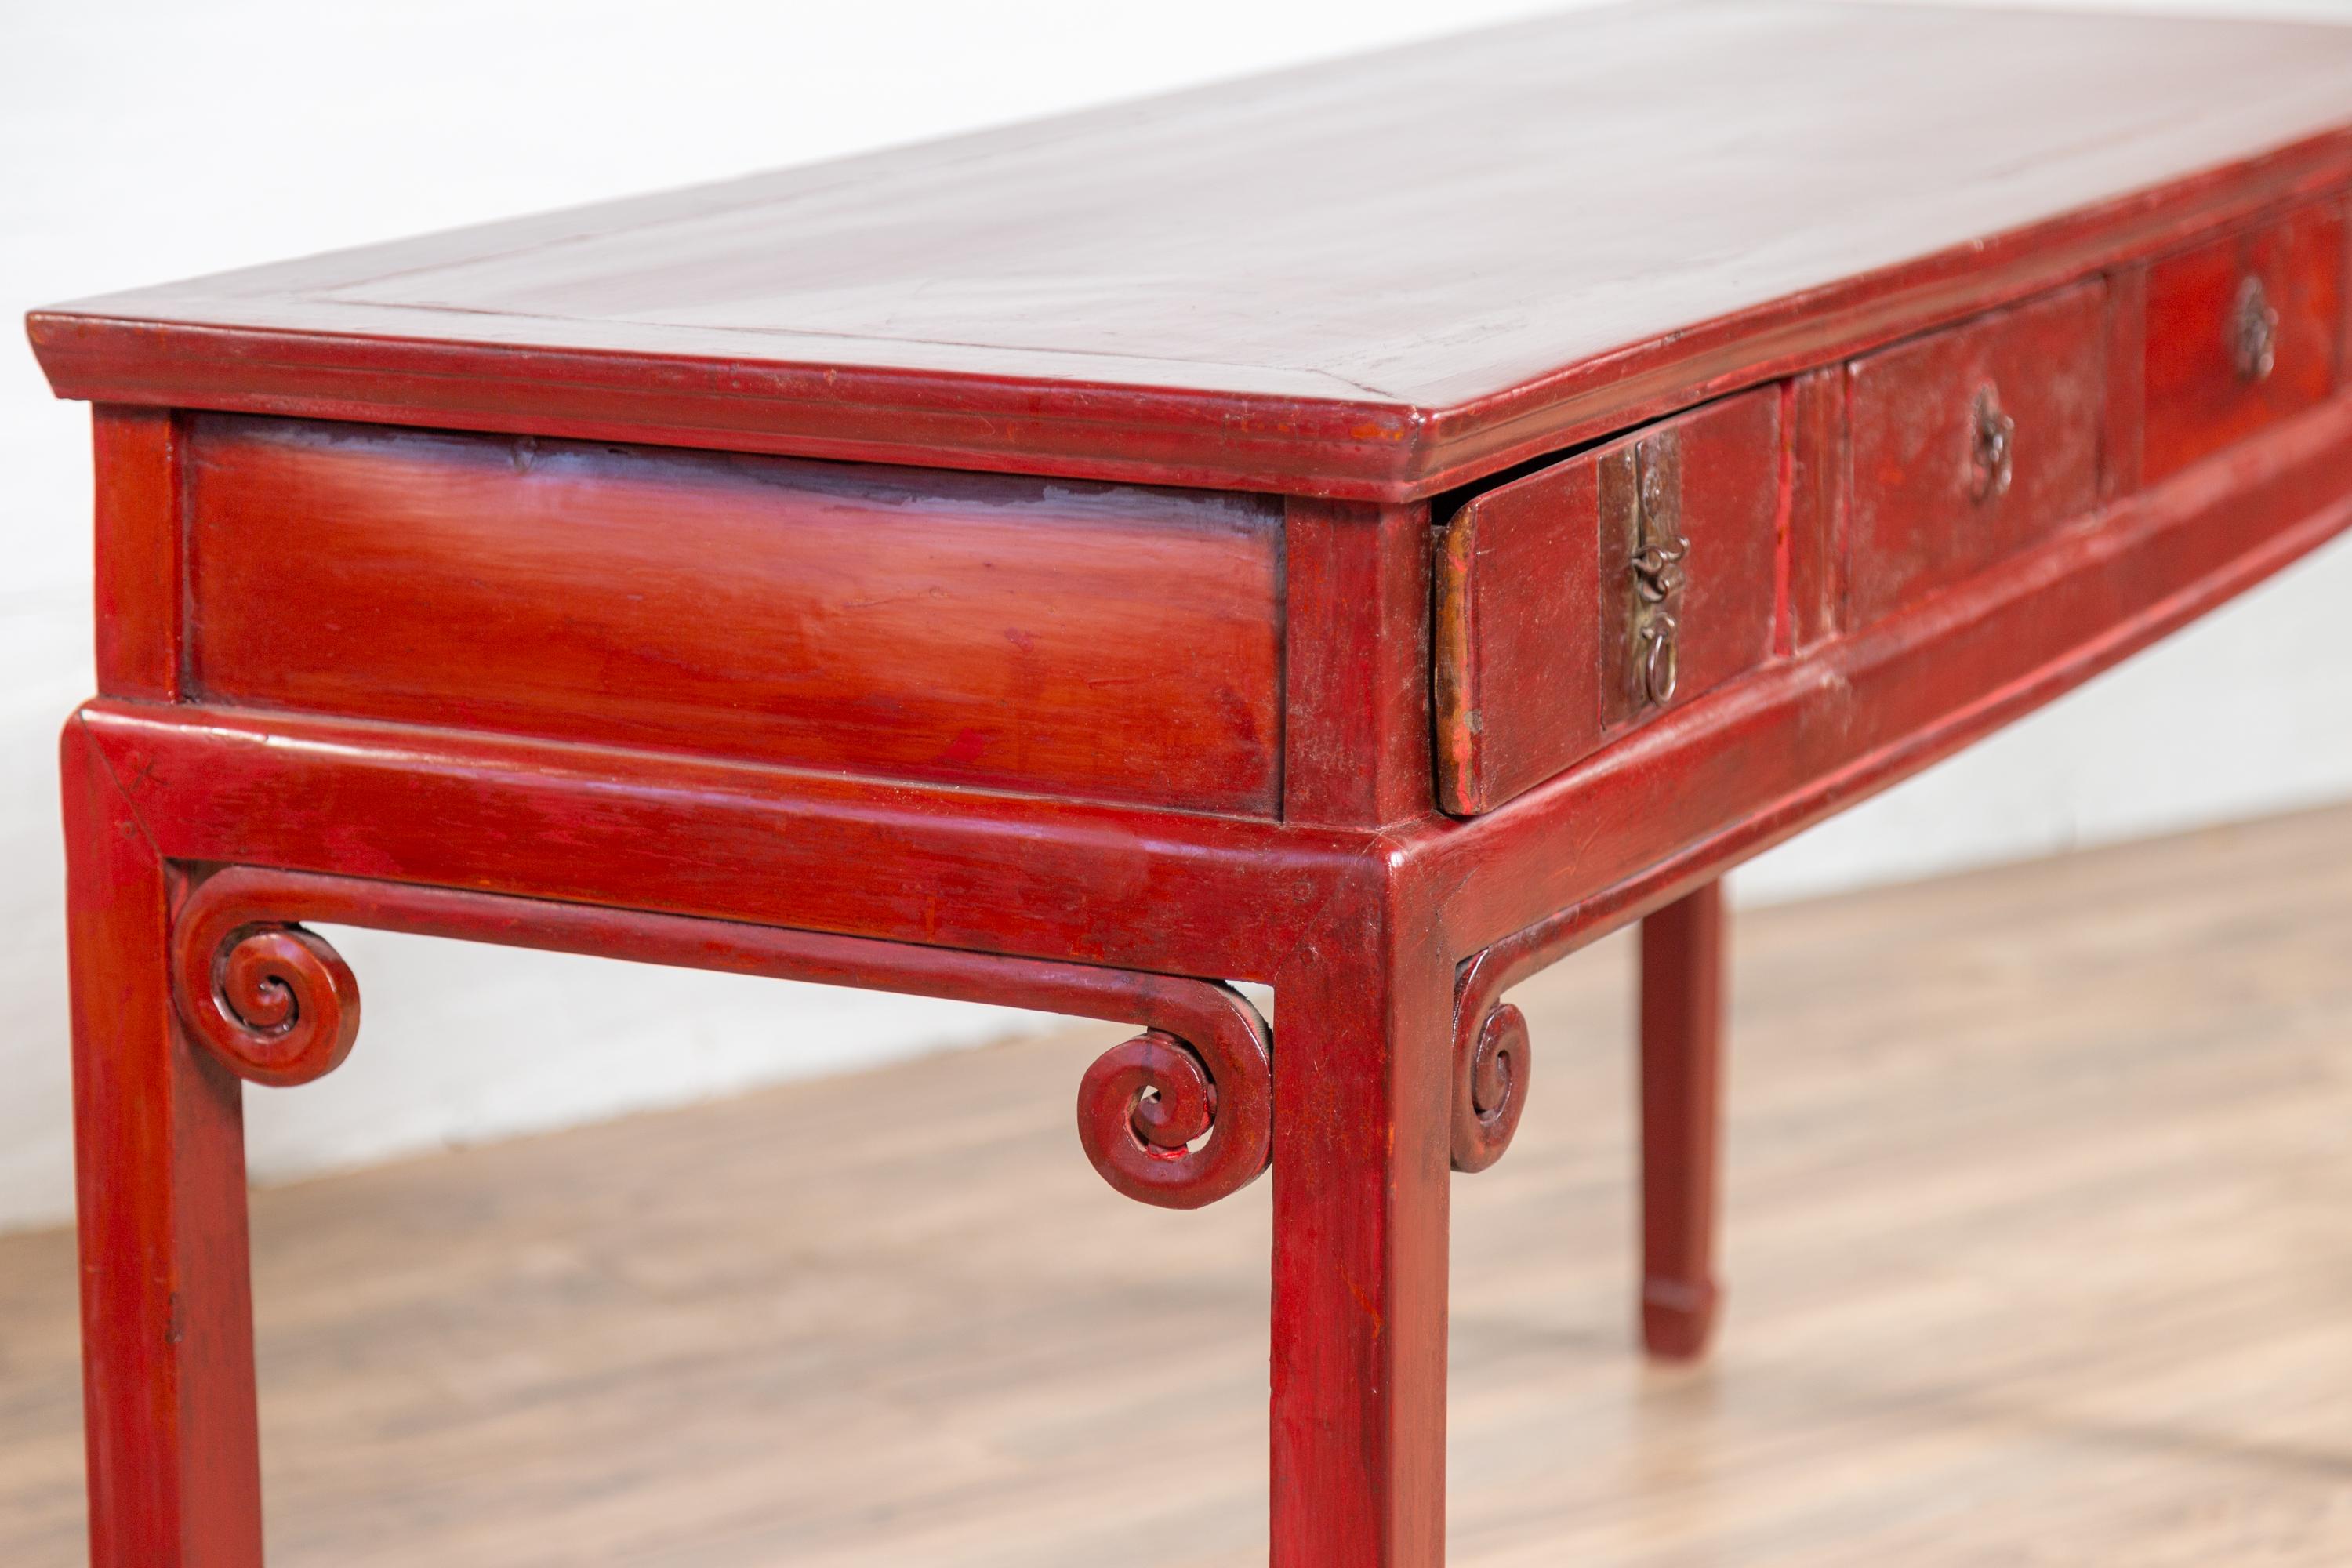 Chinese Antique Red Lacquered Wooden Desk with Four Drawers and Curling Scrolls 6